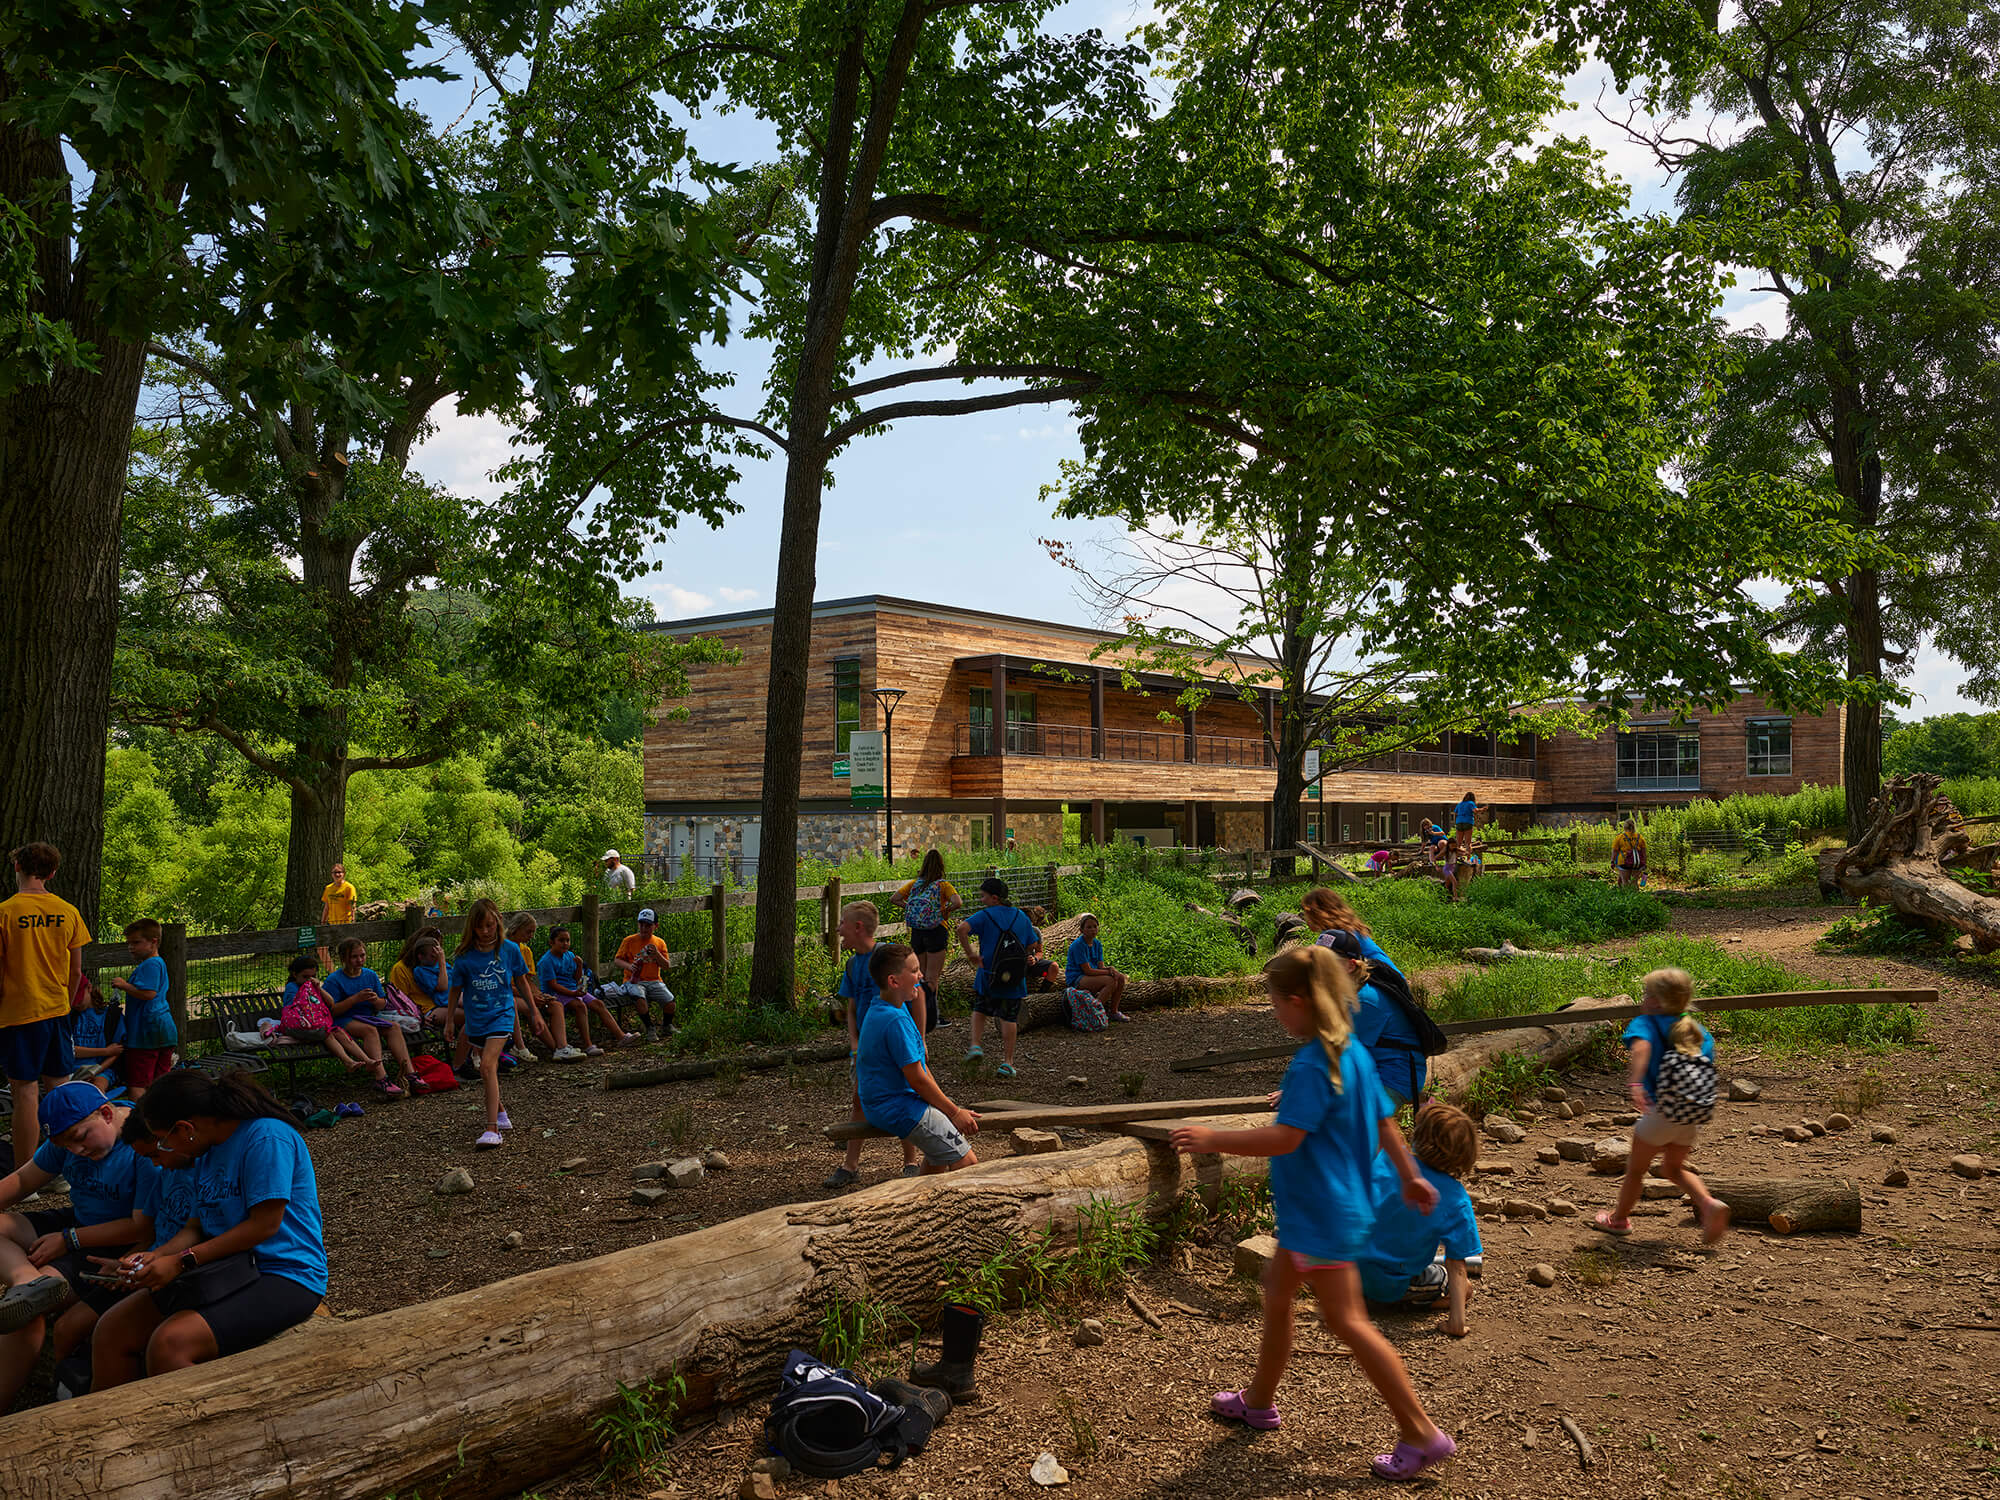 kids in blue shirts at summer camp frolic in the dirt